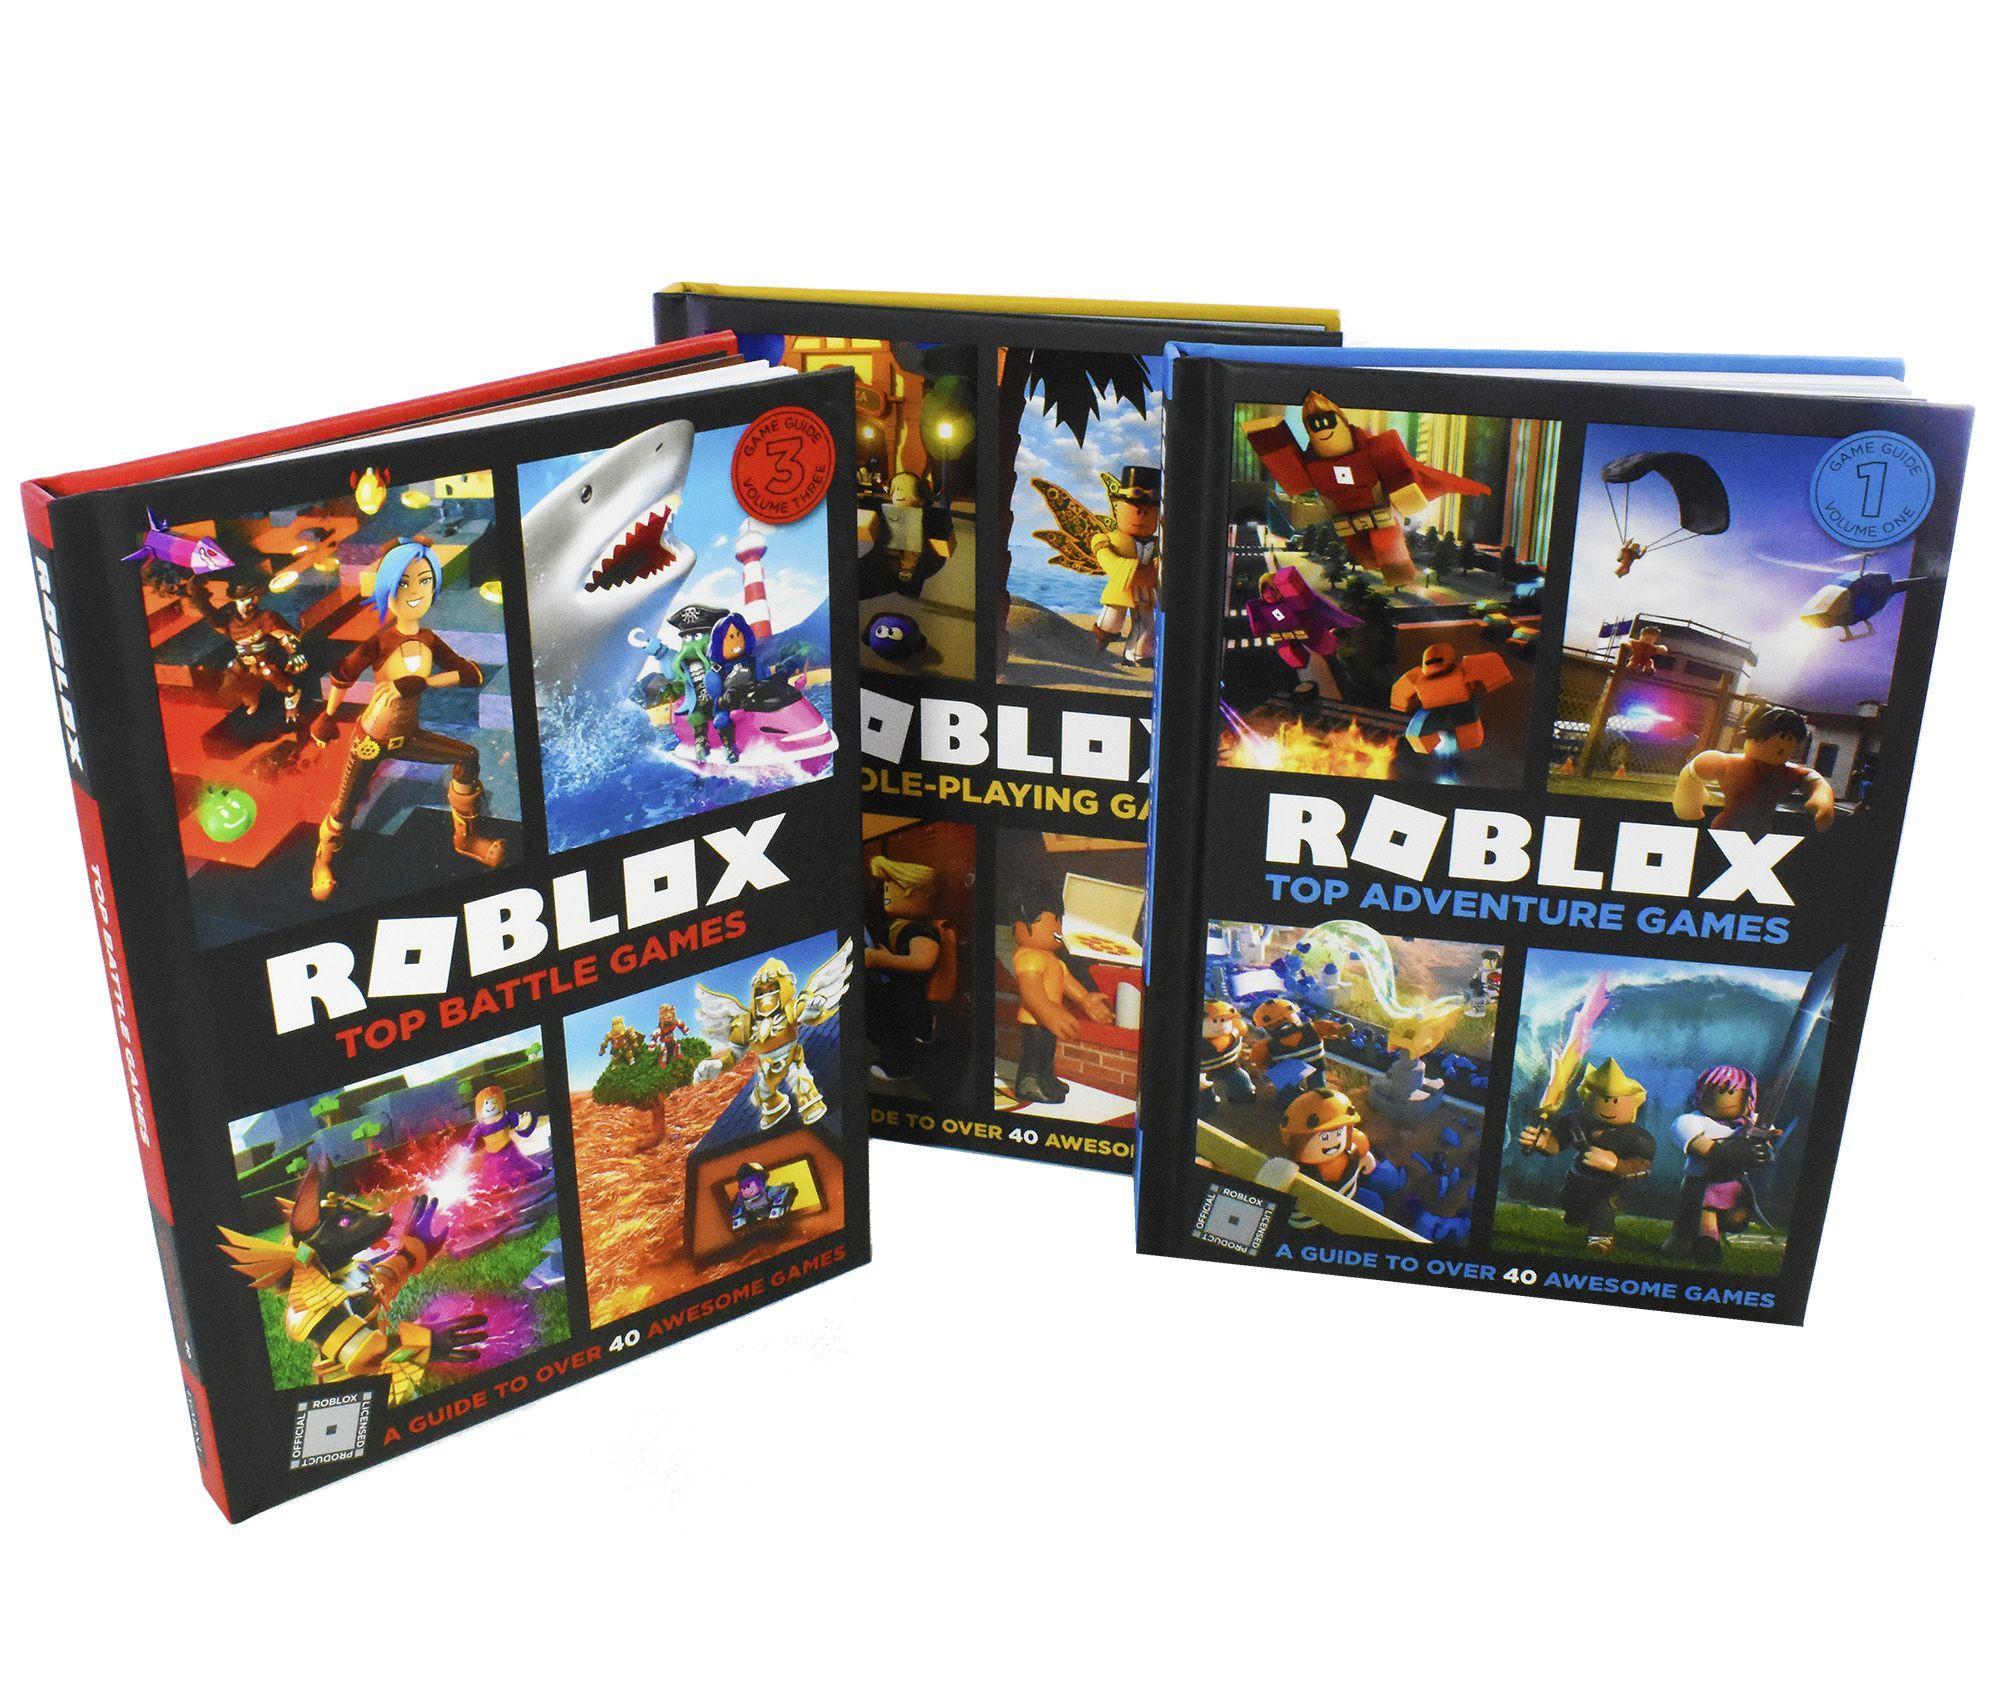 Roblox Ultimate Guide 3 Books Children Collection Hardback By David Jagneaux St Stephens Books - roblox the essential guide scholastic shop